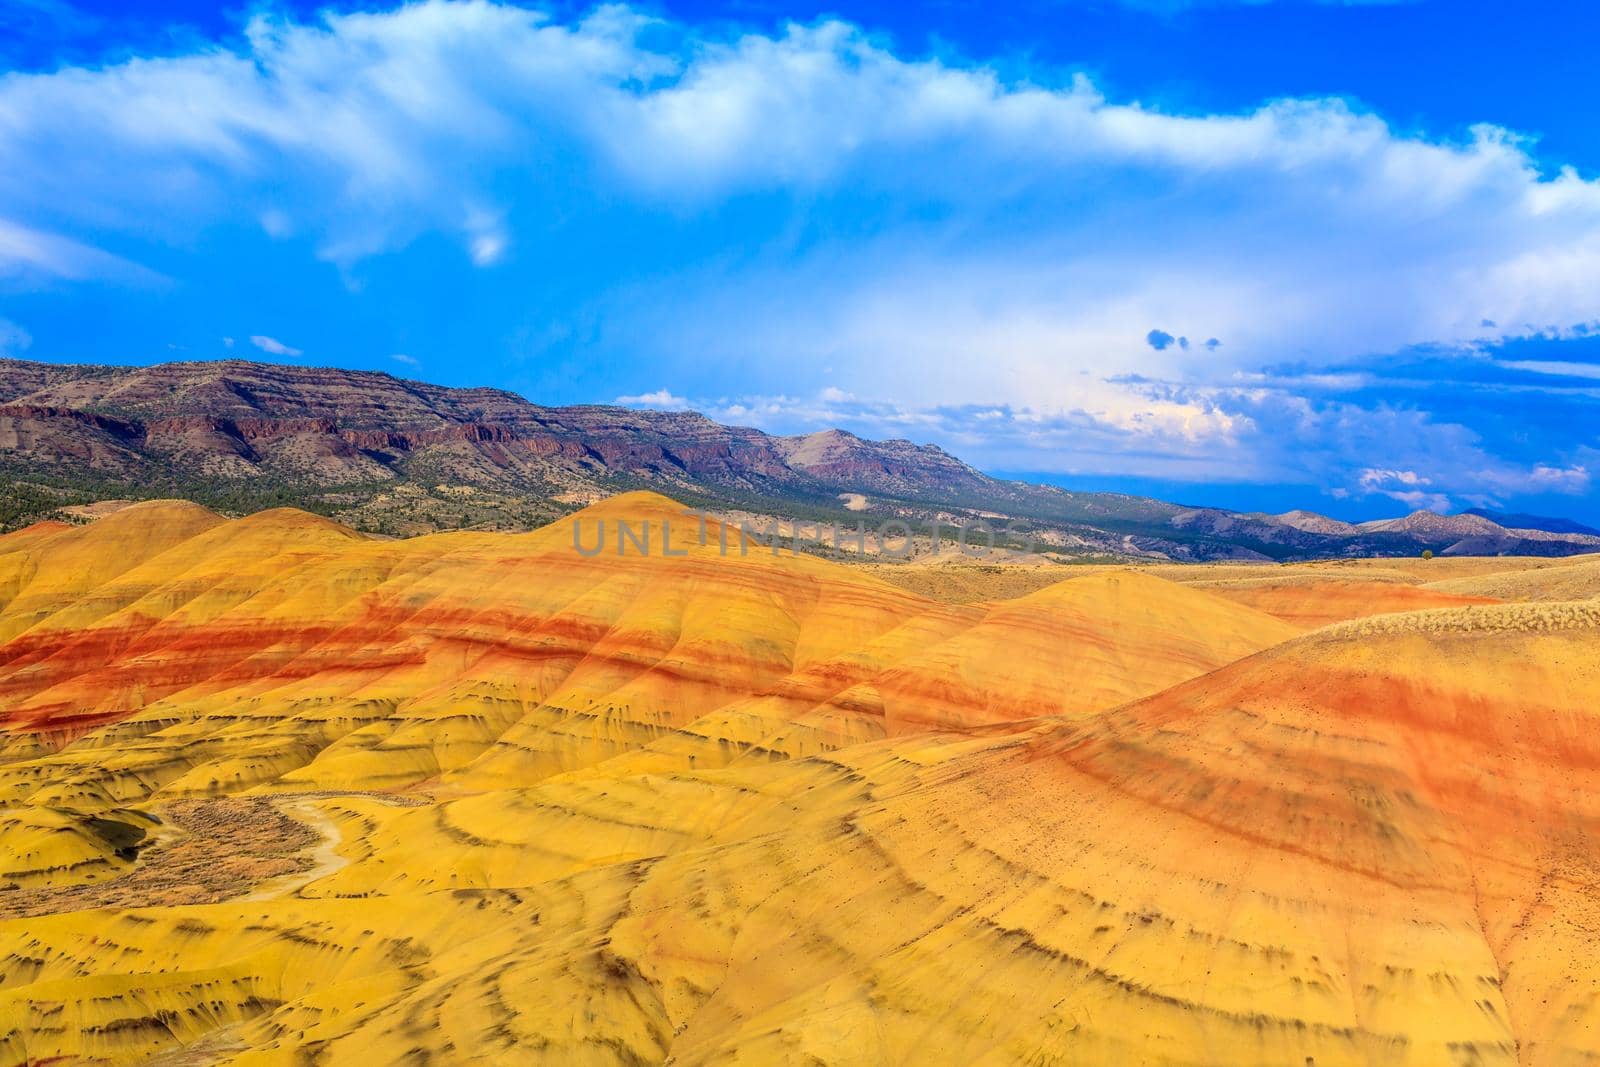 Colorful painted hills at John Day Fossil Beds National Monument, Oregon.